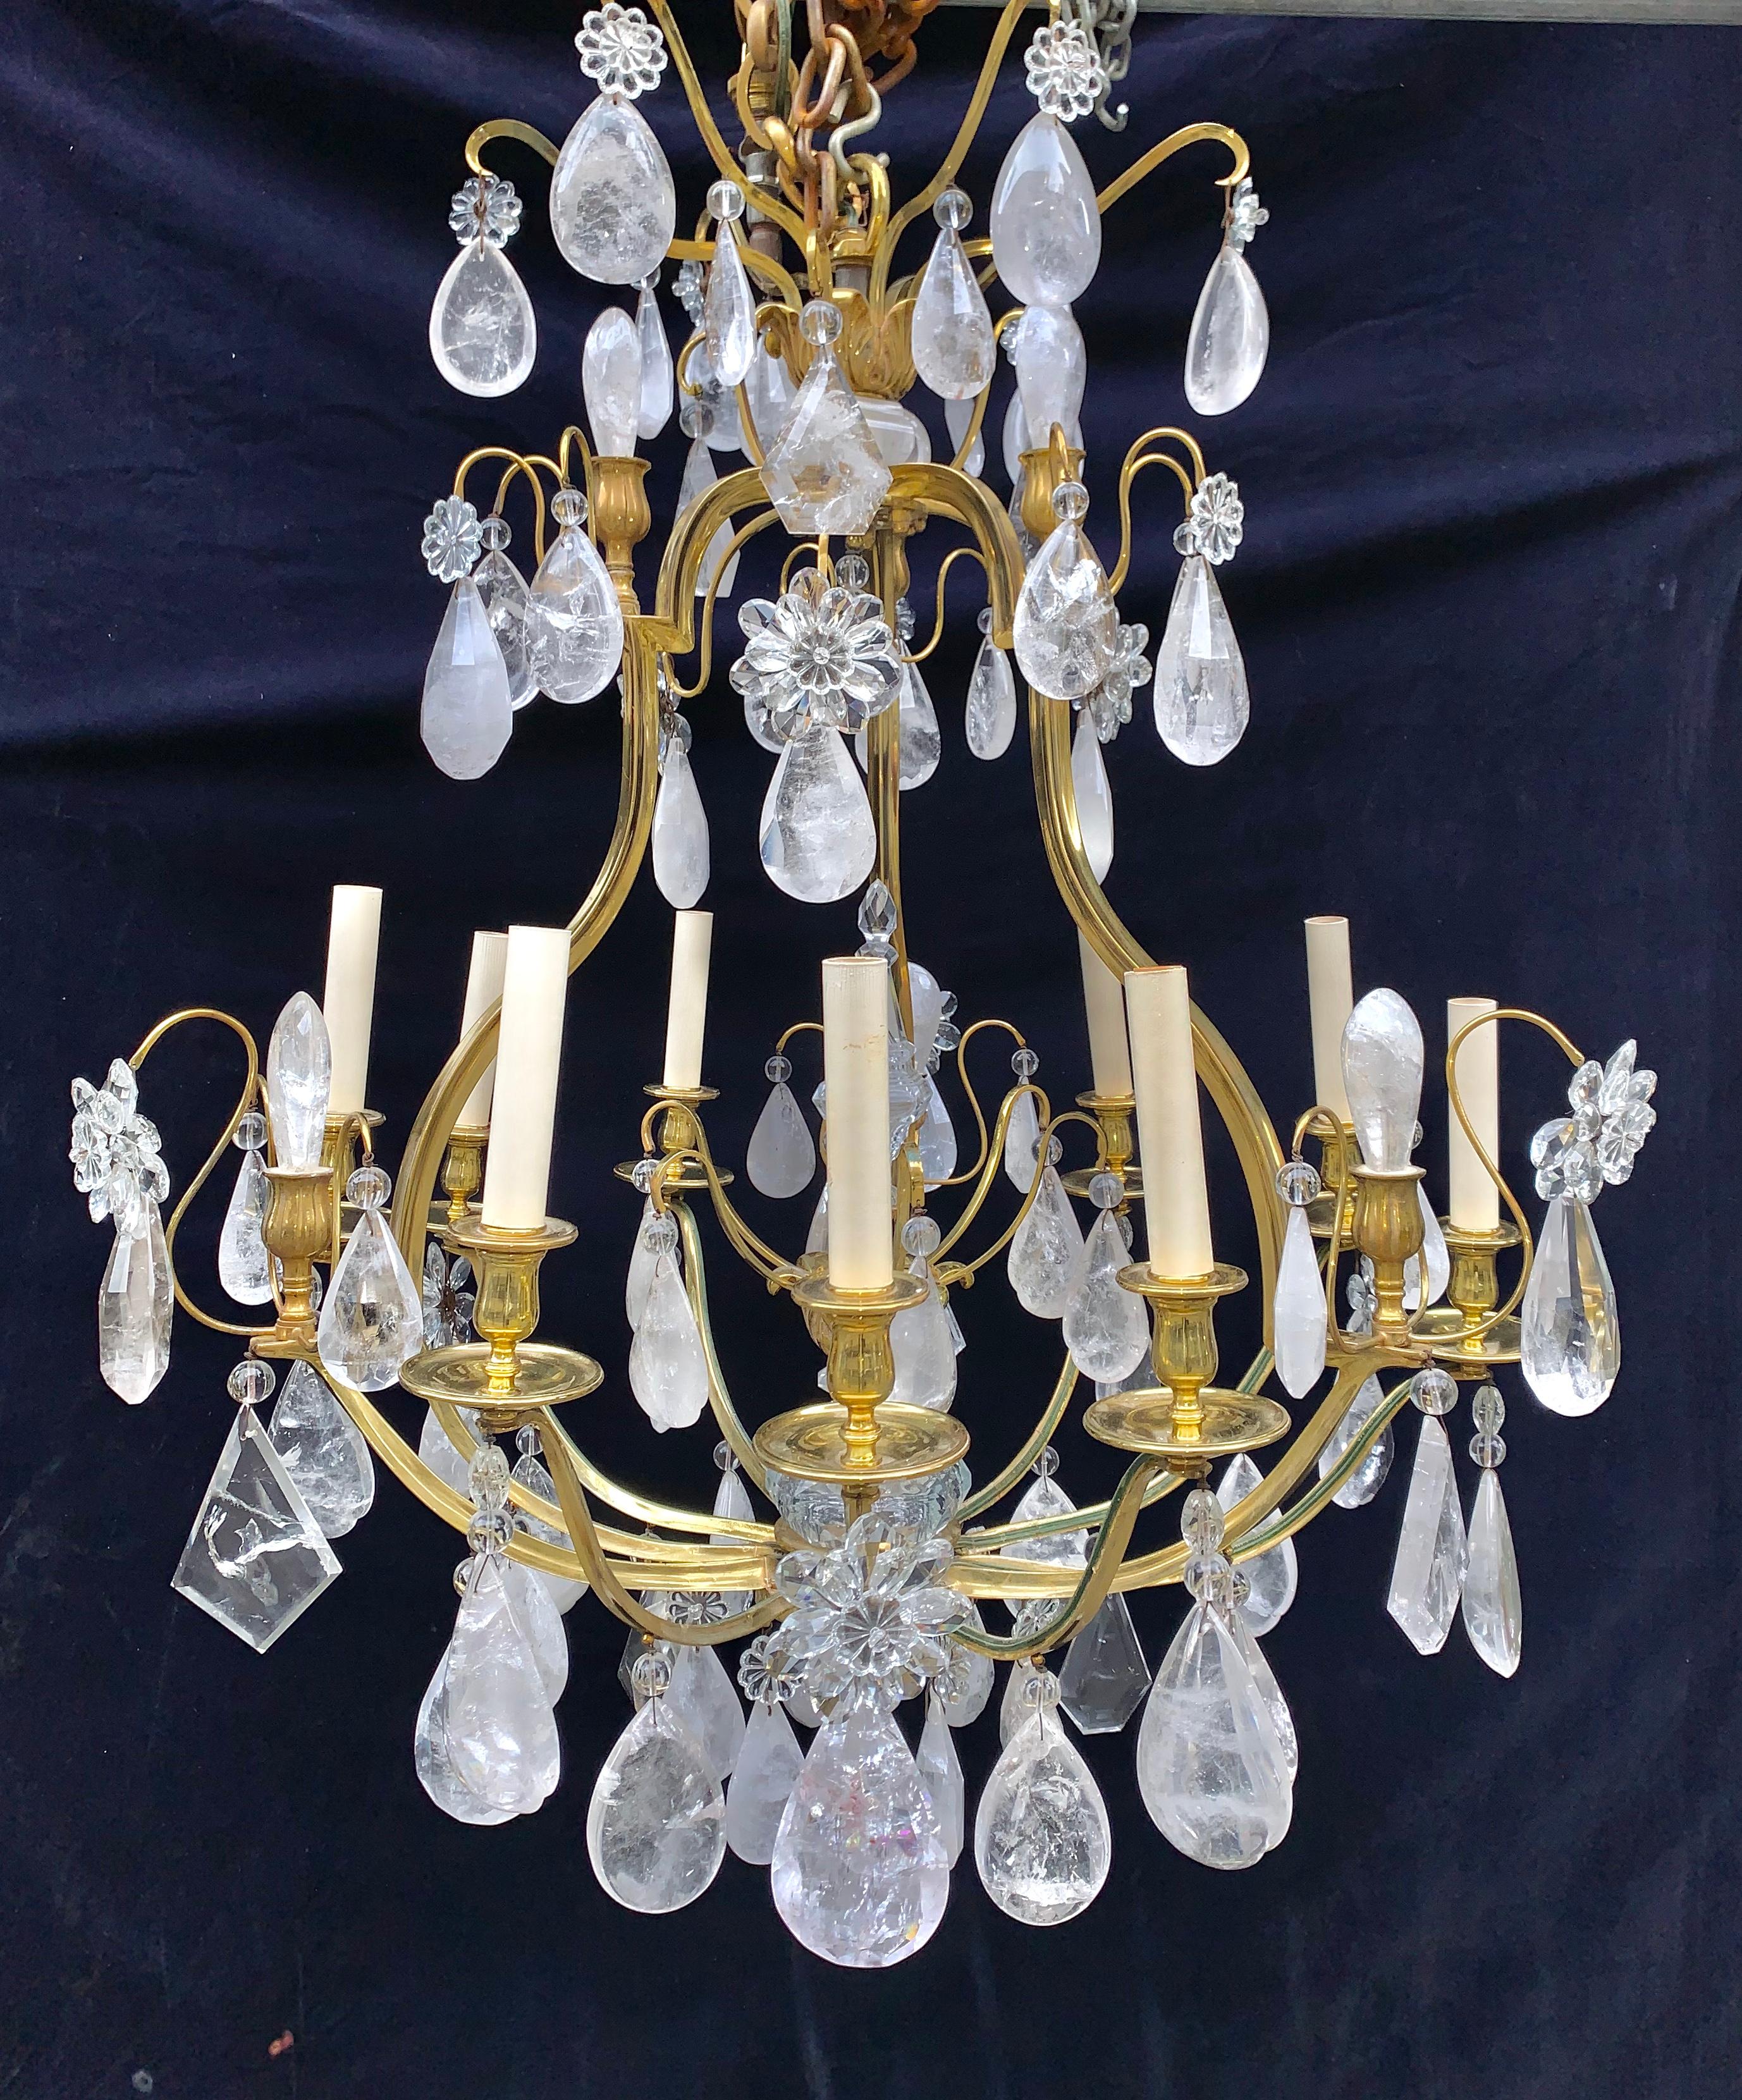 A pair of large French Louis XVI Baguès style gilt bronze and cut rock crystal multi light cage form chandeliers of fine quality embellished with large cut rock crystals prisms and flowers finally adorned with cut rock crystal balls.